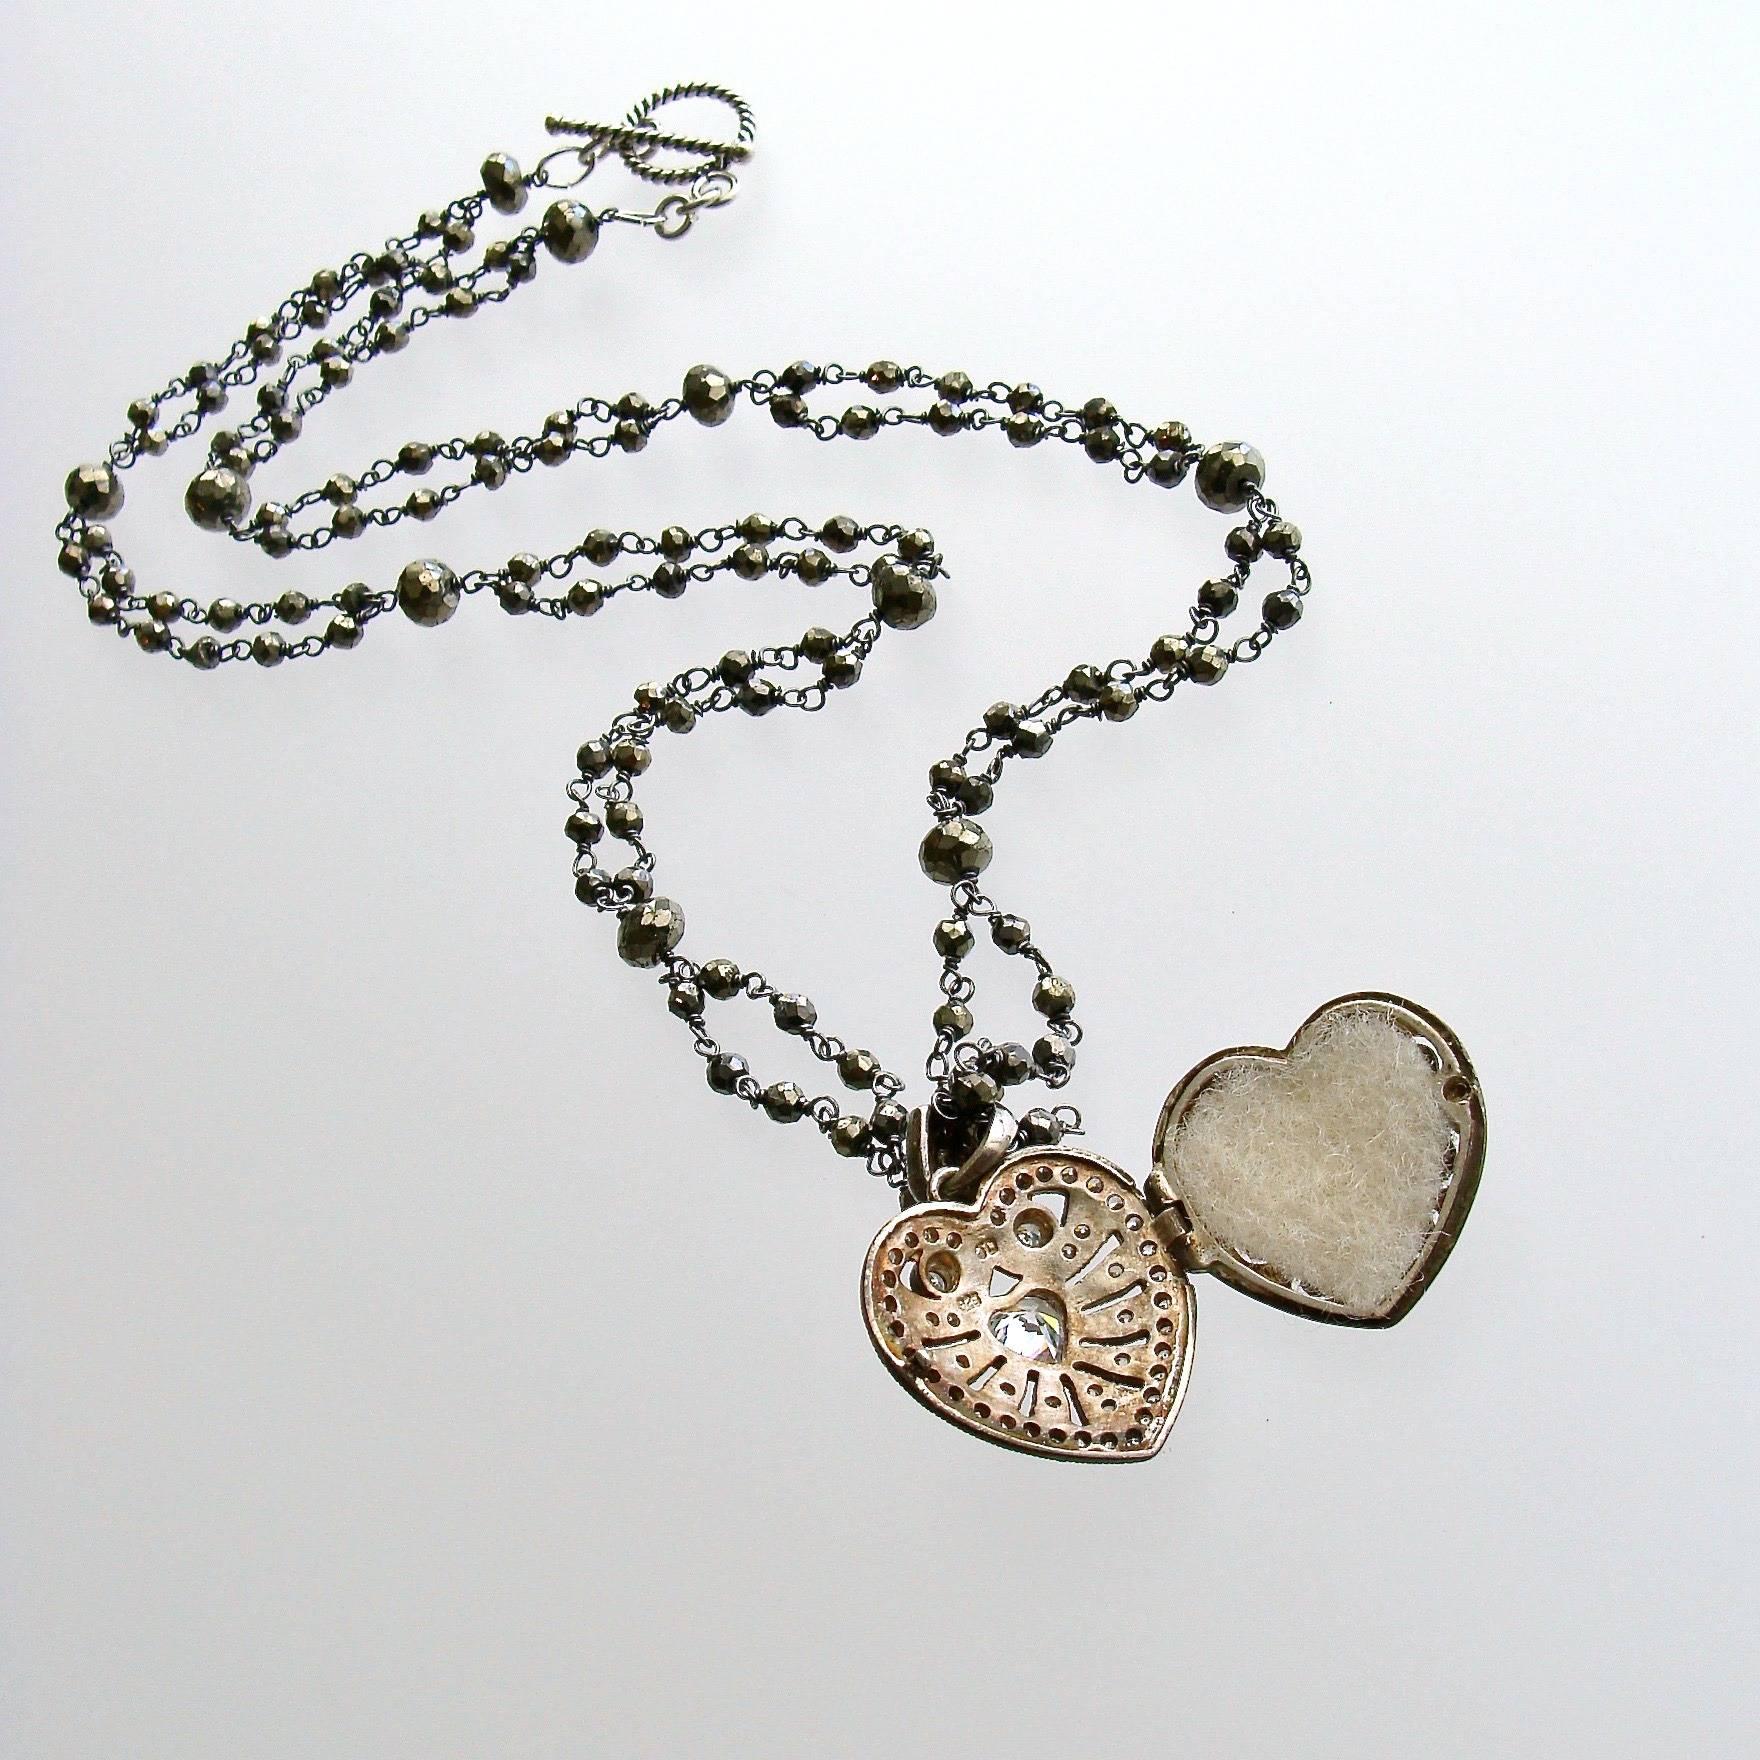 Saint Esprit II Heart Necklace.

A double strand of hand linked pyrite with a Victorian silver paste heart vinaigrette is paired with other layering necklaces revolving around the French theme of the Saint Esprit Dove.  The darling little heart